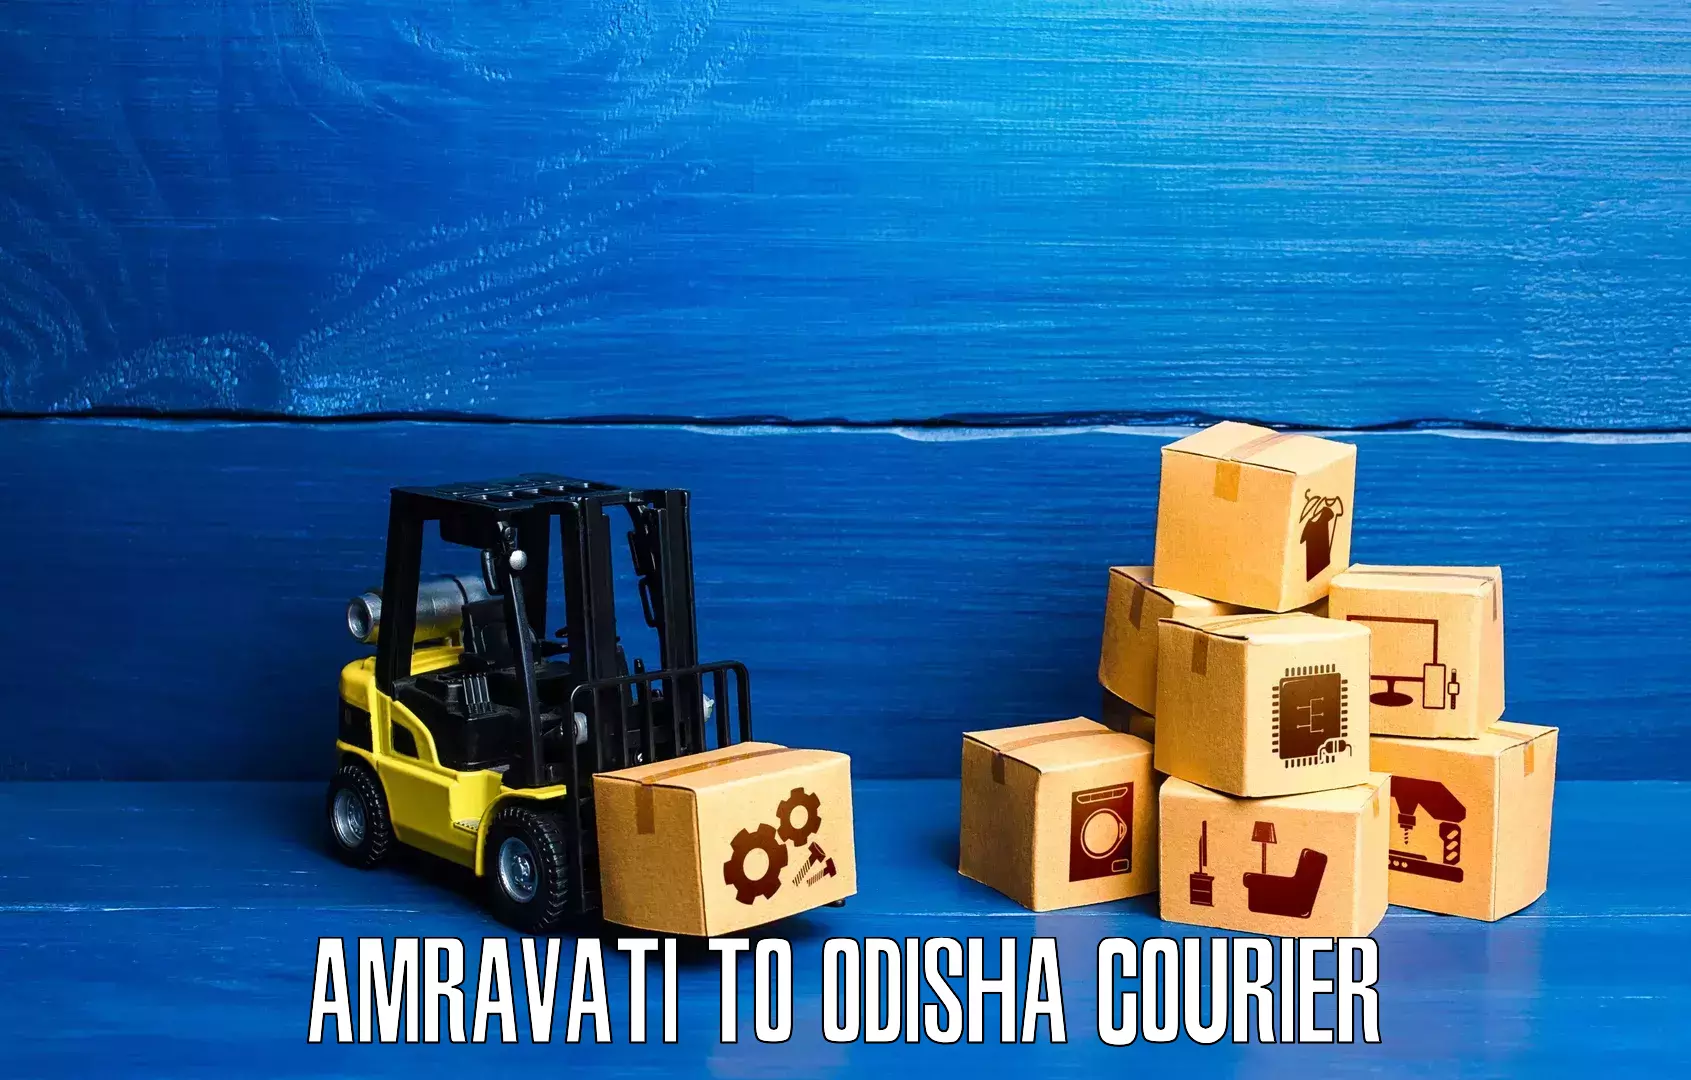 State-of-the-art courier technology Amravati to Bonth